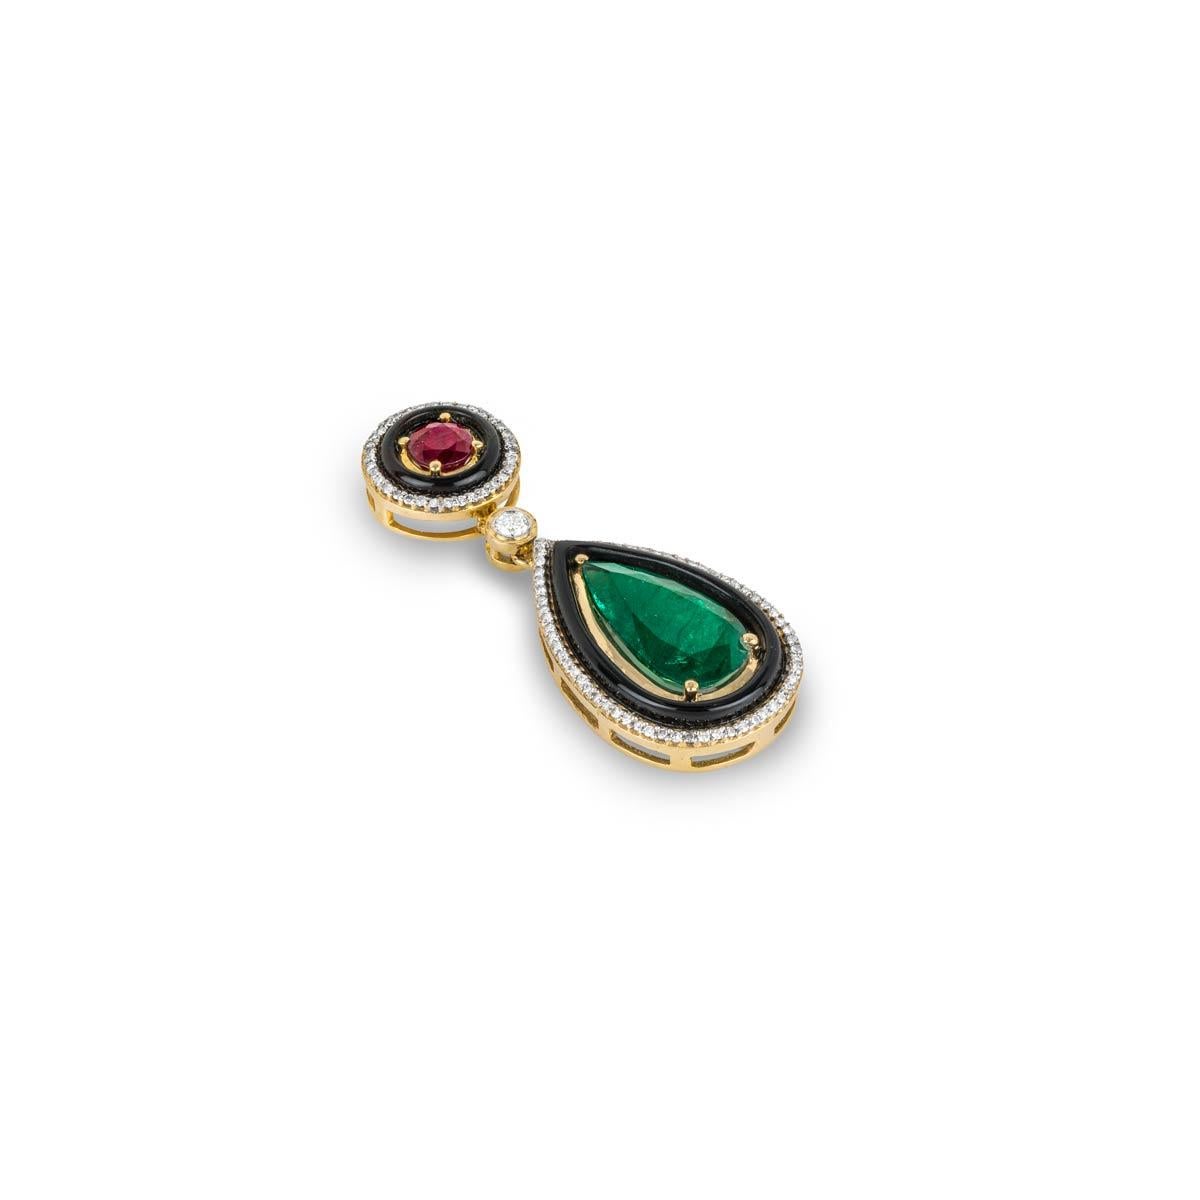 An 18k yellow gold multi-gem pendant. The pendant is made up of a circular motif and a pear shaped motif joined together by a single round brilliant cut diamond. The first motif is set with a round cut ruby weighing 1.39ct and has a black onyx